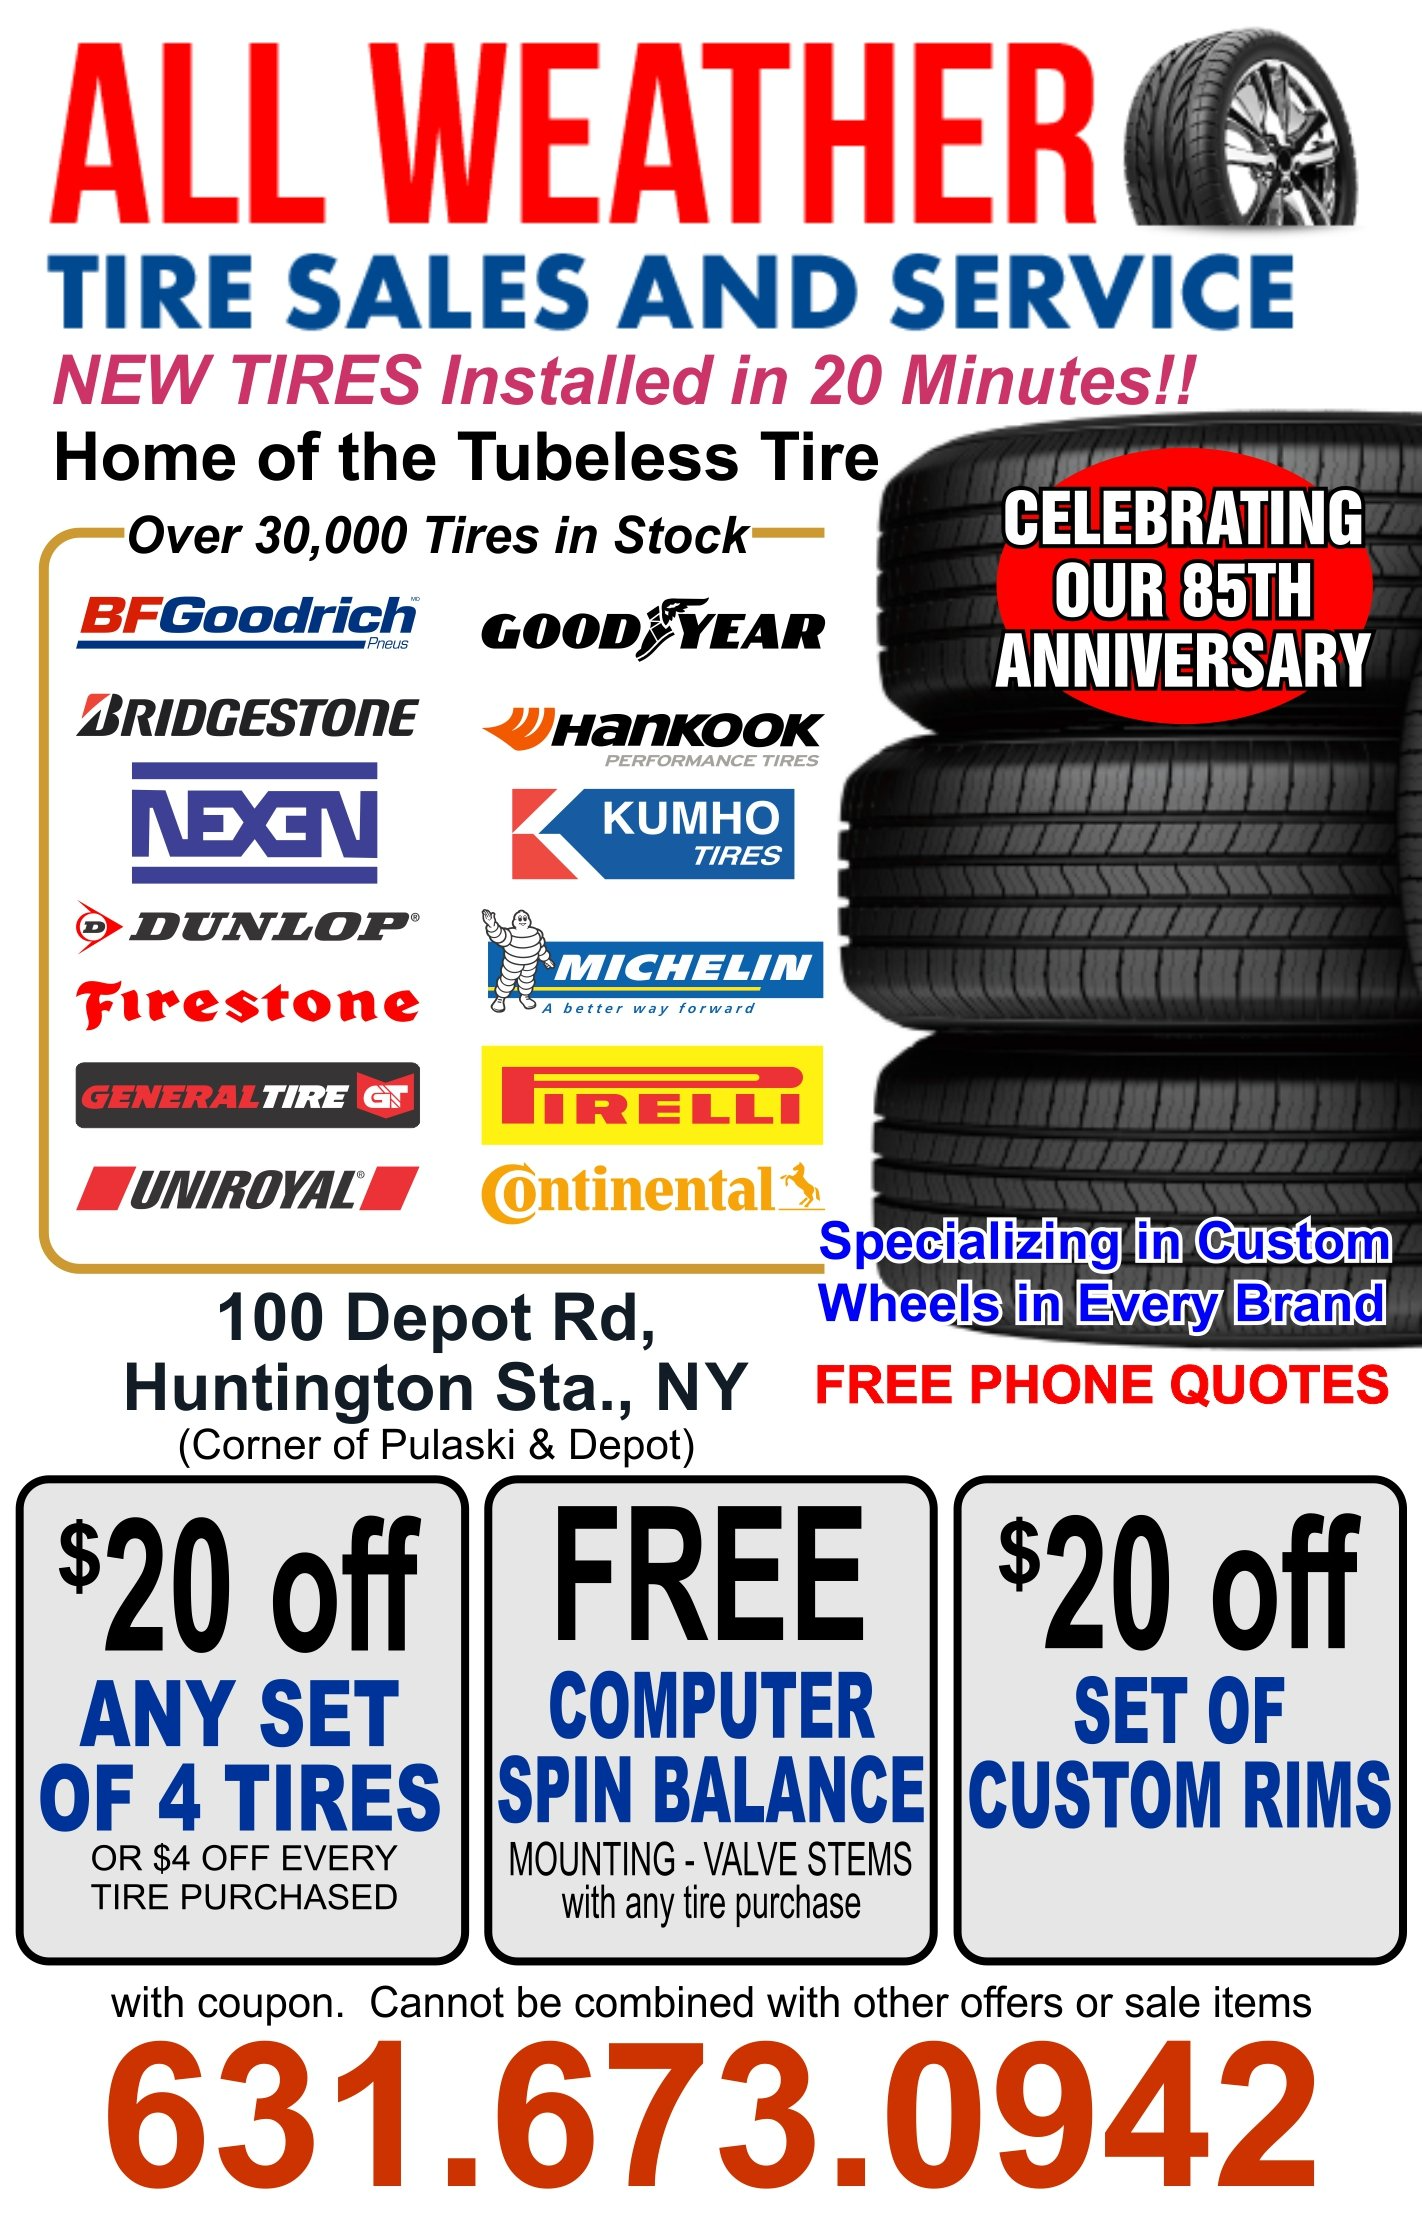 An advertisement for all weather tire sales and service